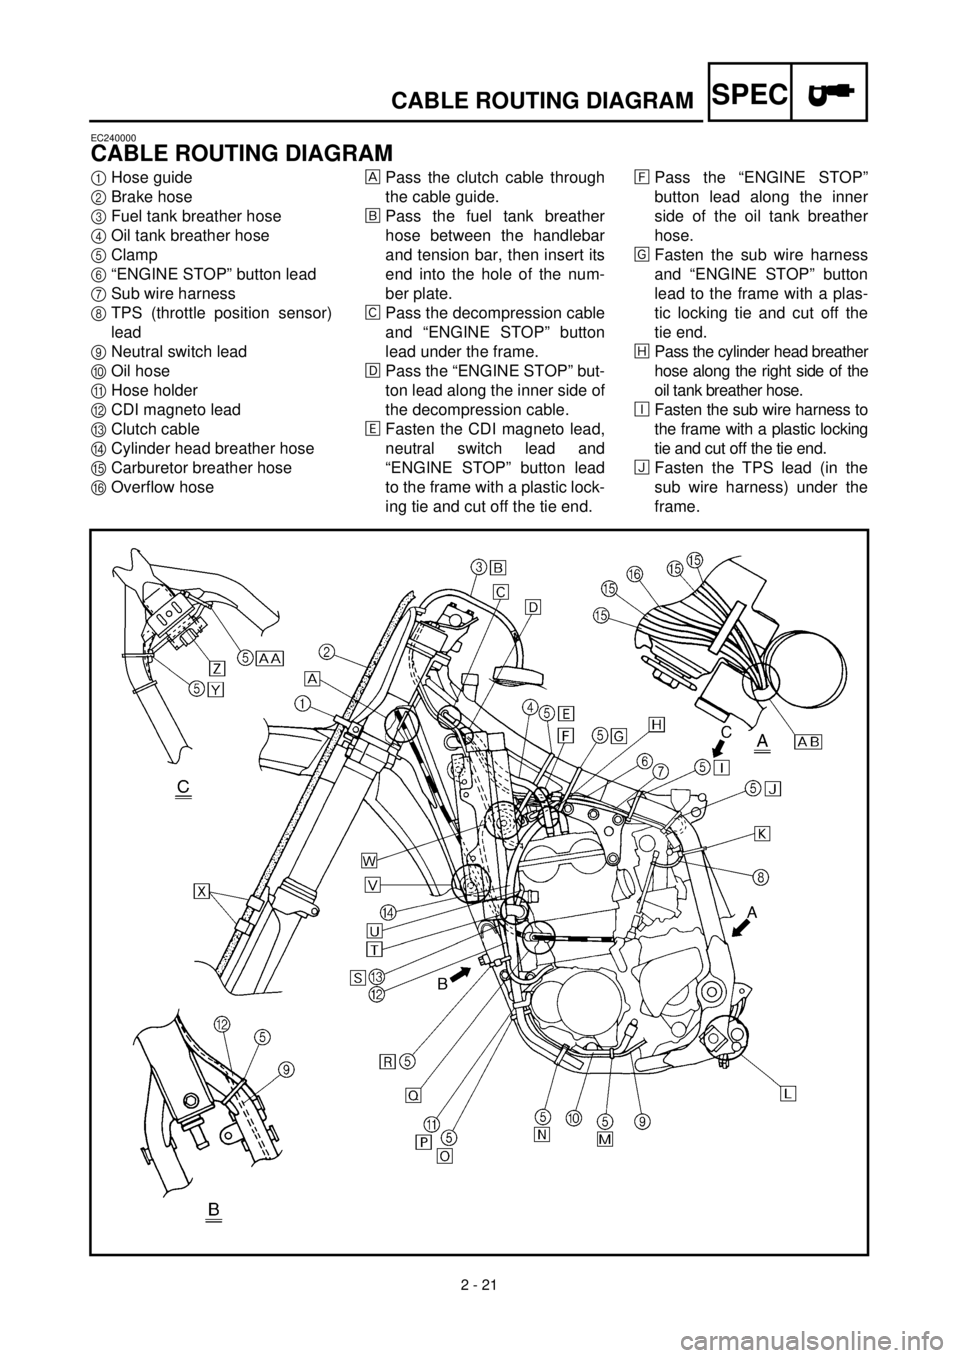 YAMAHA YZ426F 2000  Owners Manual  
2 - 21
SPEC
 
CABLE ROUTING DIAGRAM 
EC240000 
CABLE ROUTING DIAGRAM 
1 
Hose guide 
2 
Brake hose 
3 
Fuel tank breather hose 
4 
Oil tank breather hose 
5 
Clamp 
6 
“ENGINE STOP” button lead 